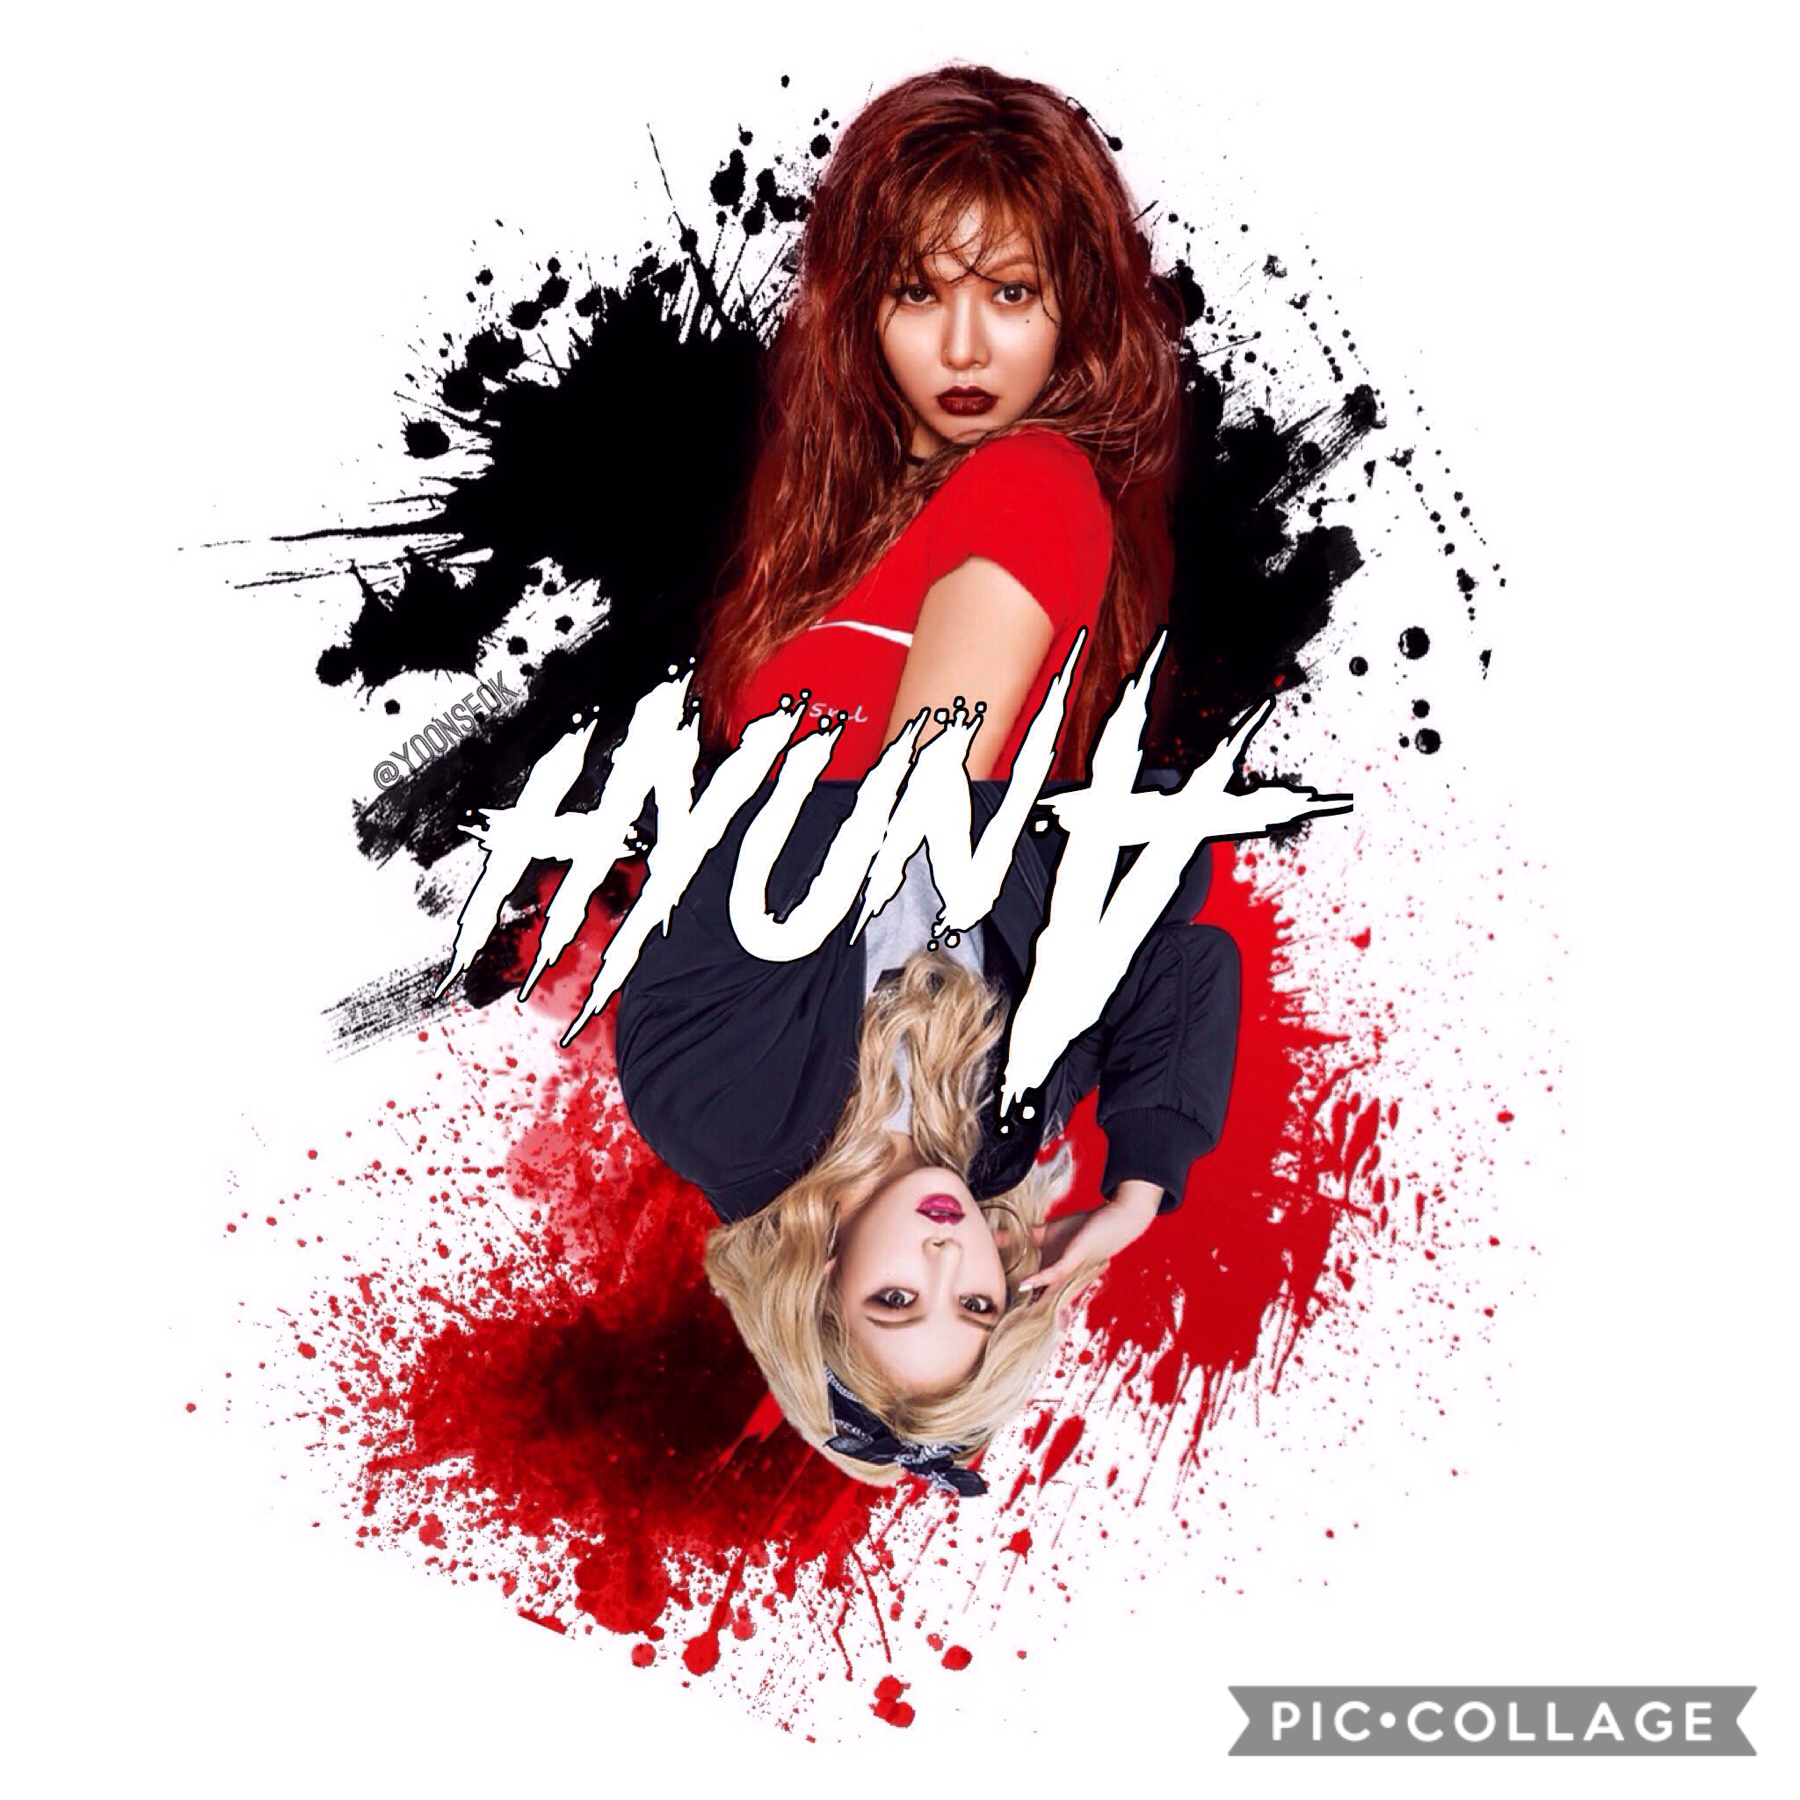 They deserve better. Hyuna has been my favourite soloist since the start. Please support her and Hyojong with whatever they do. Cube don't understand what they're losing. I feel bad for other artists. I hope ALL of Pentagon are okay. 